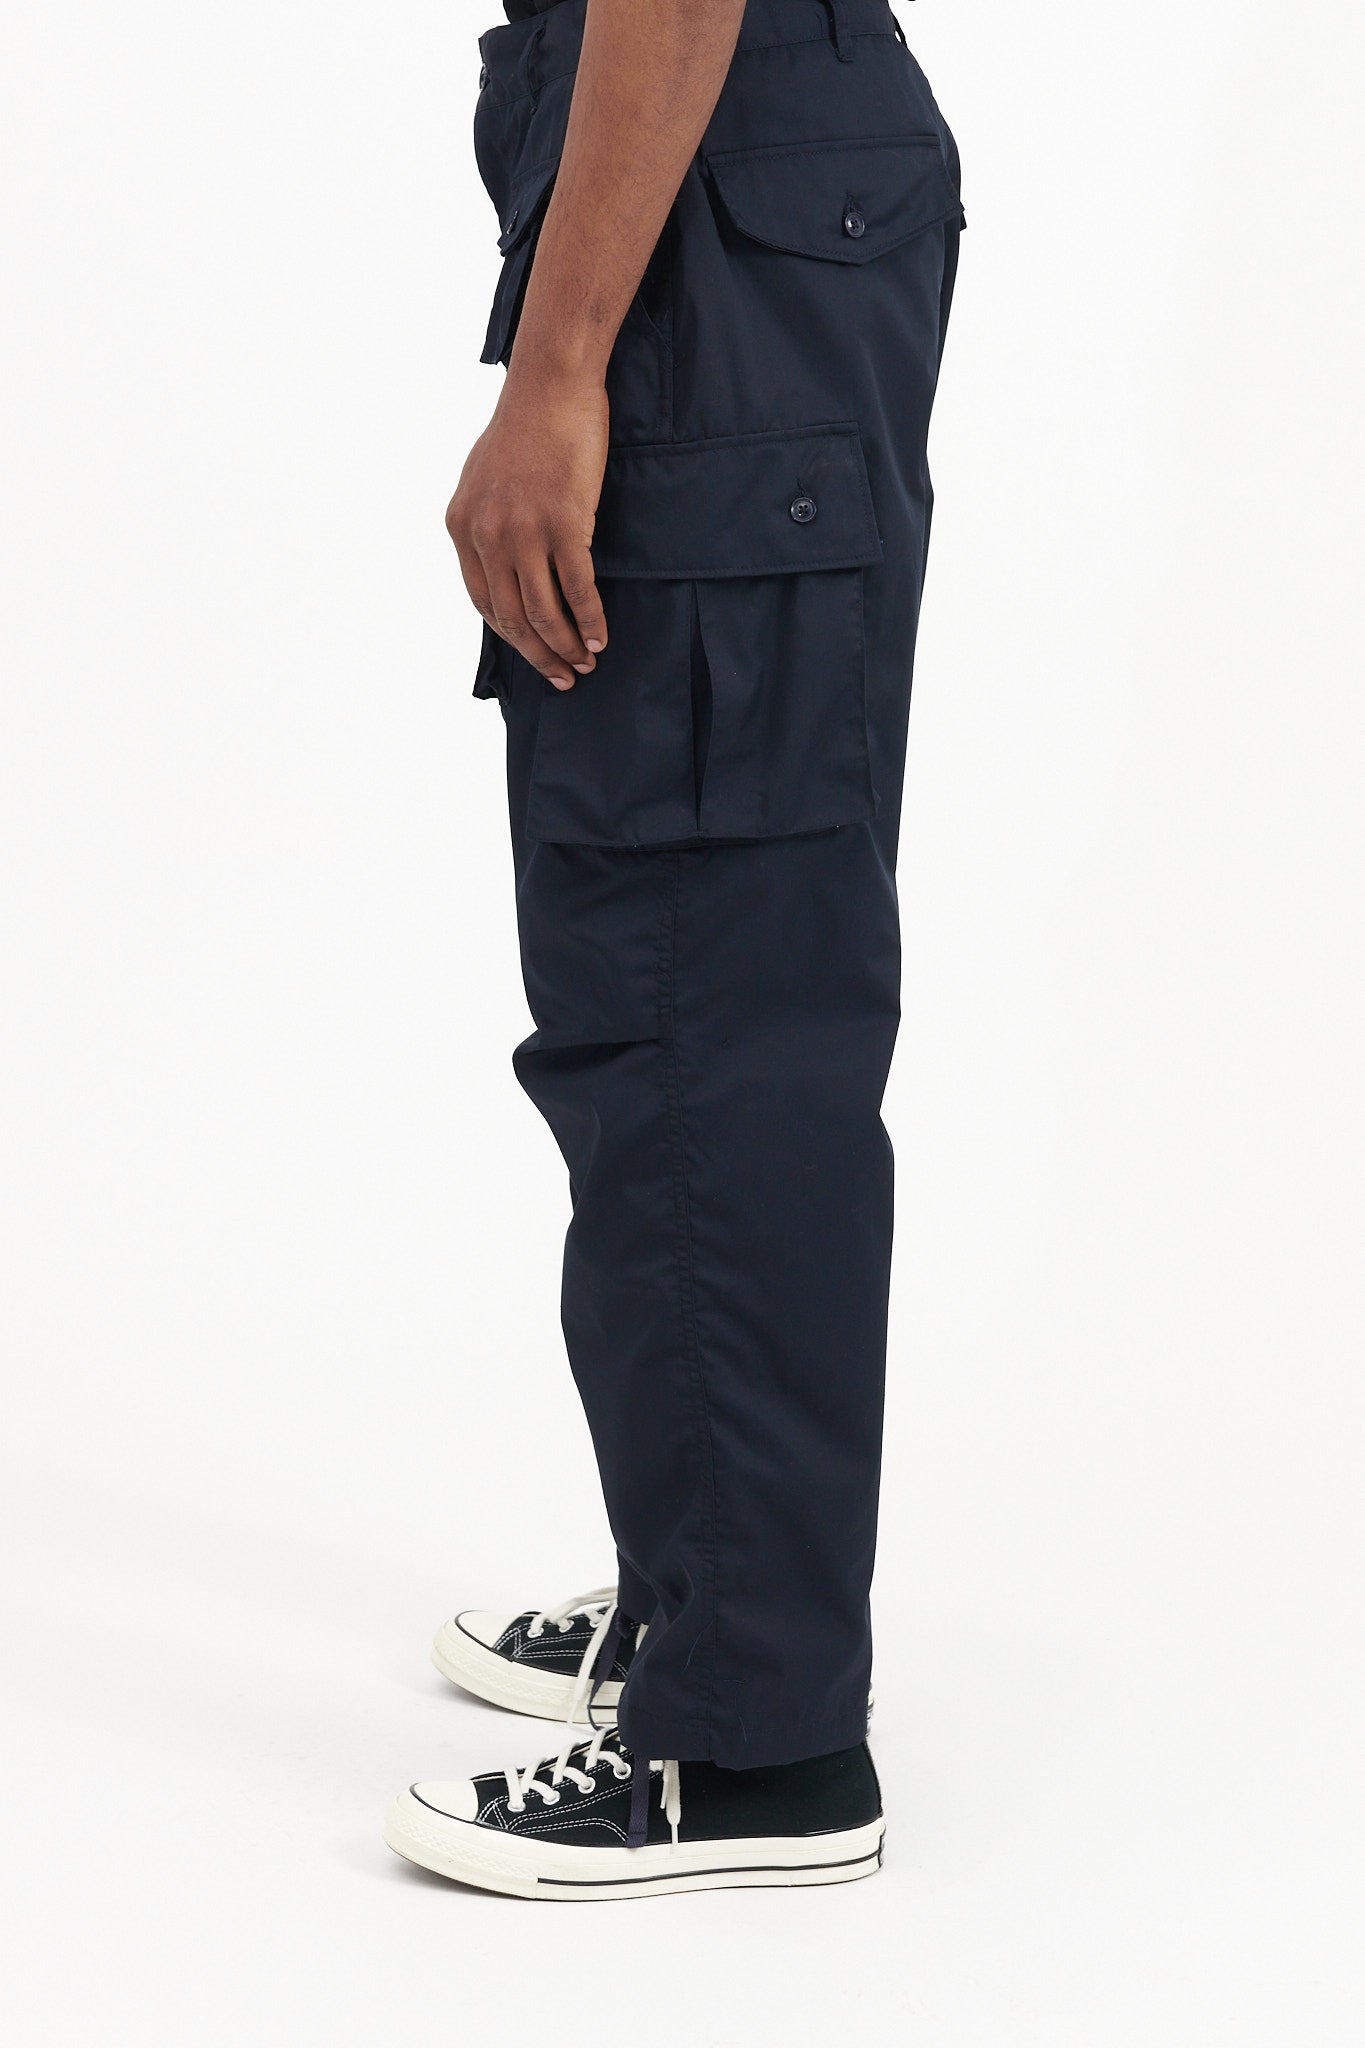 FA Pant - Dk. Navy Feather PC Twill